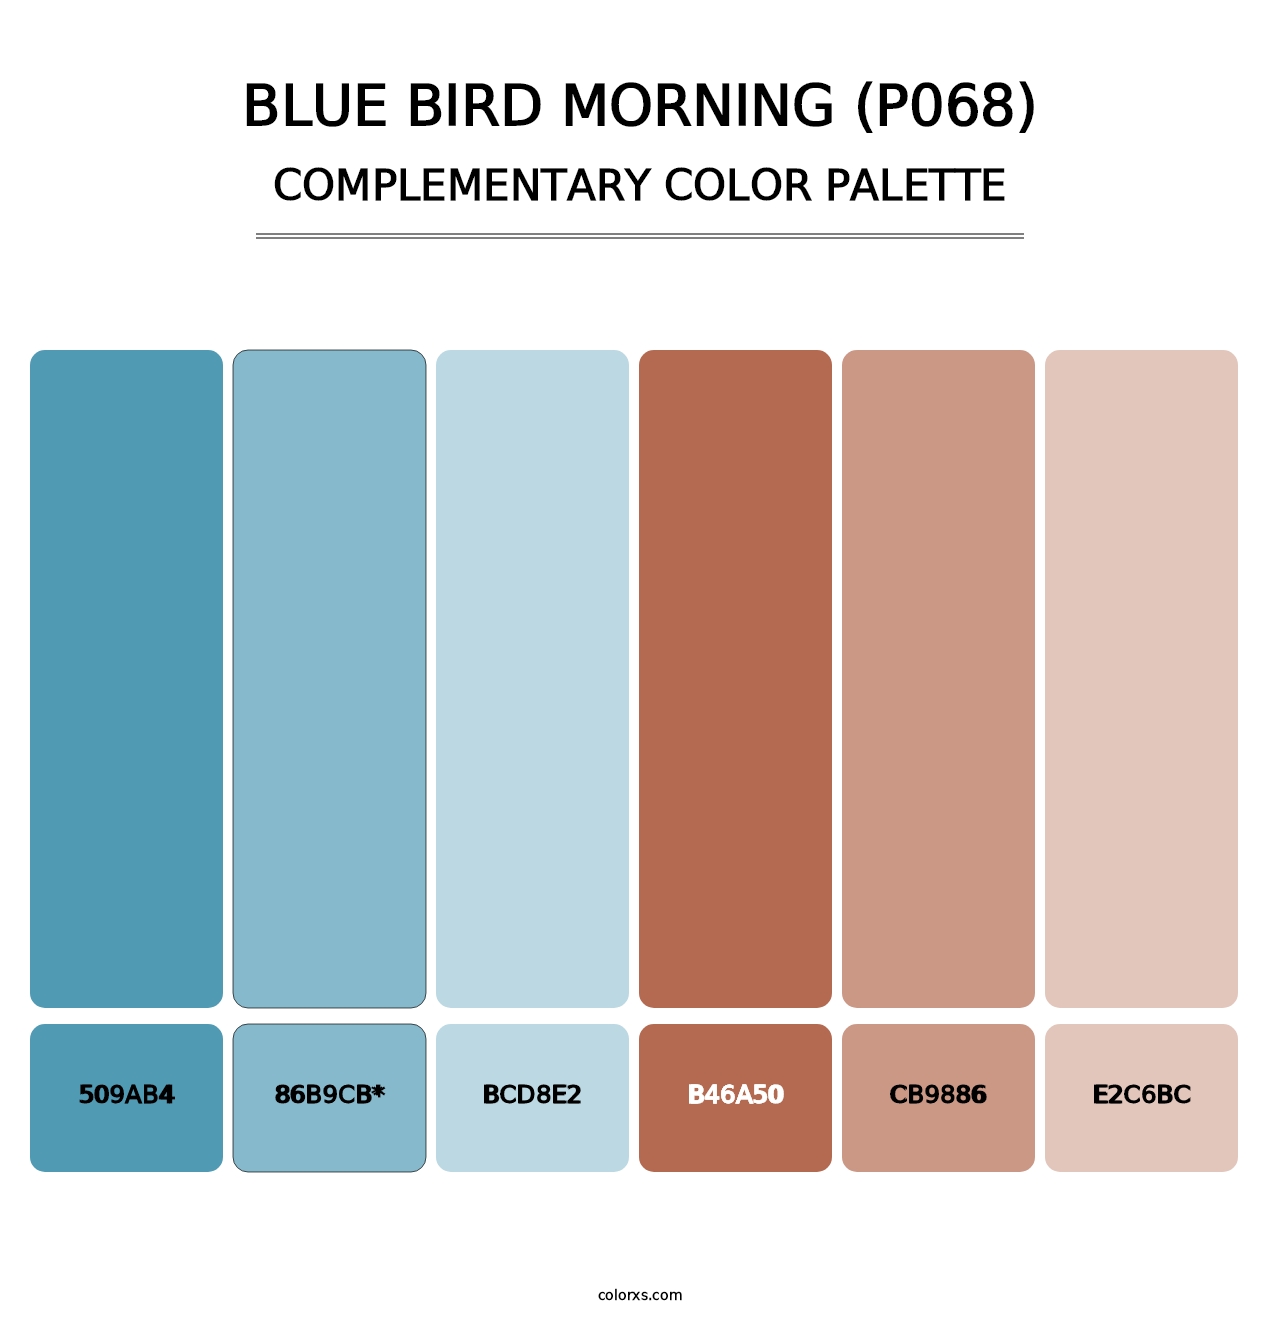 Blue Bird Morning (P068) - Complementary Color Palette